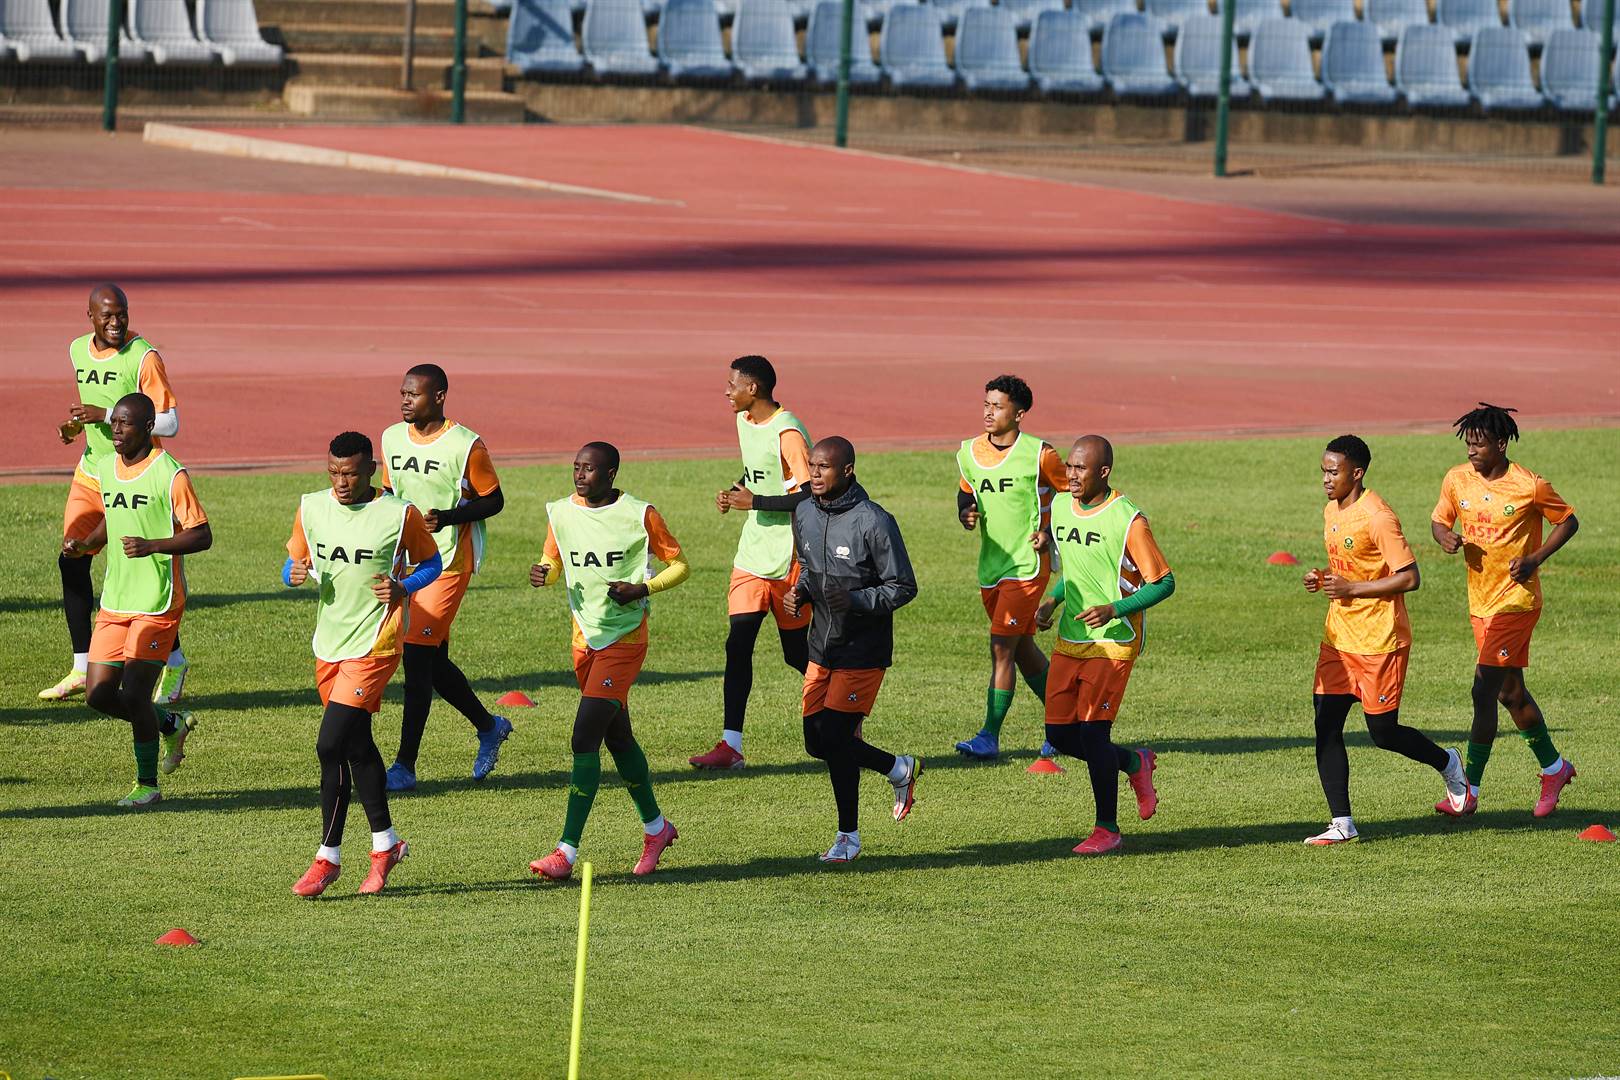 Bafafan Bafana players going through the drills during the team’s training session at the Dobsonville Stadium in Soweto this week. Photo: Lefty Shivambu/Gallo Images